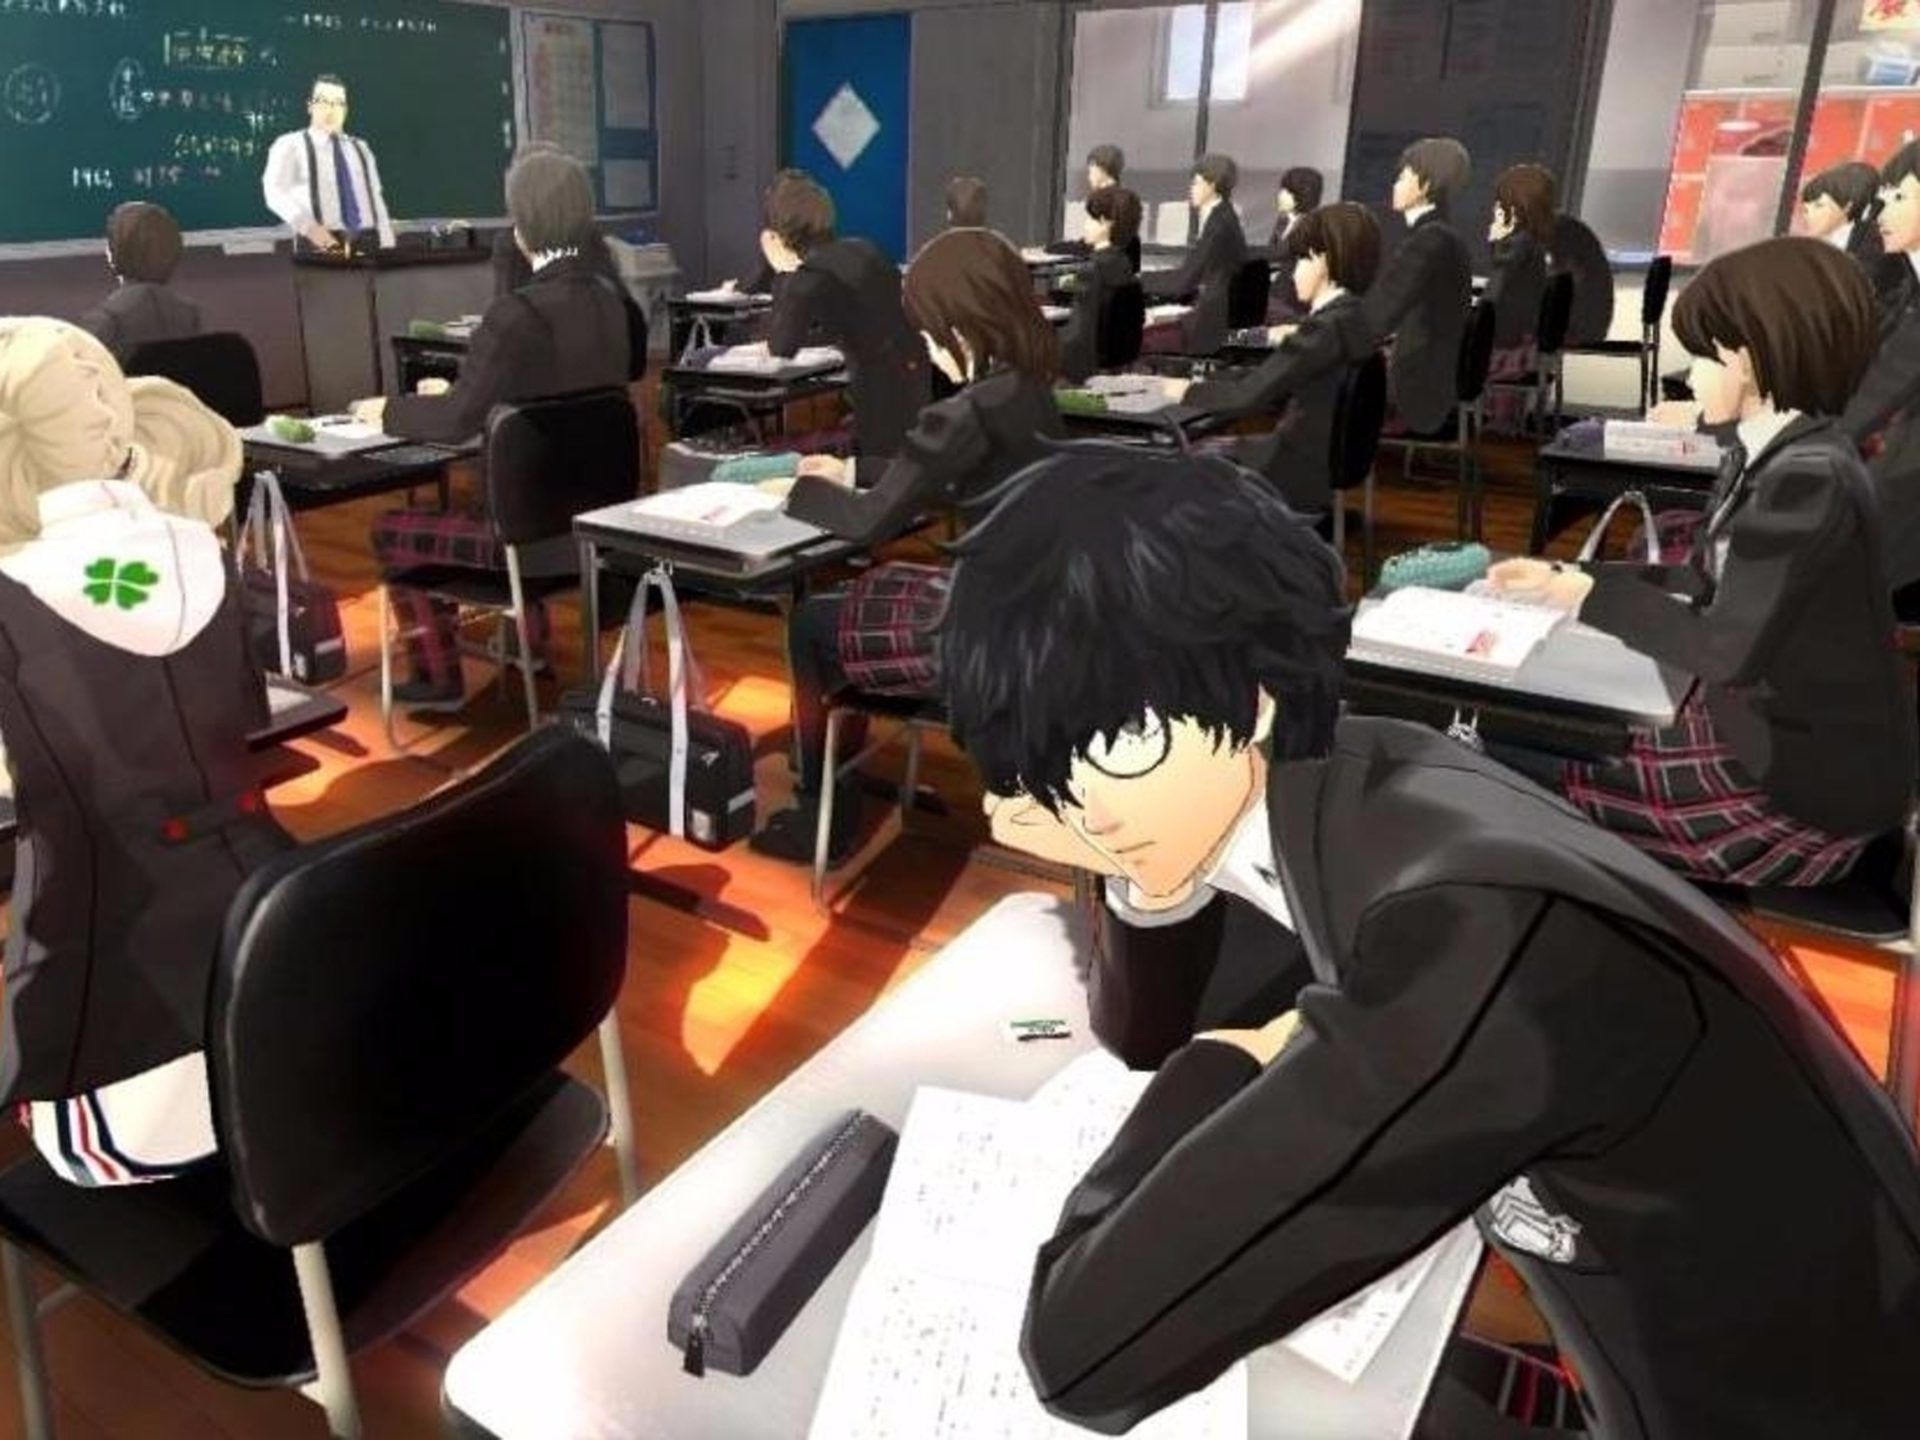 P5 quiz answers: Persona 5 Royal test answers